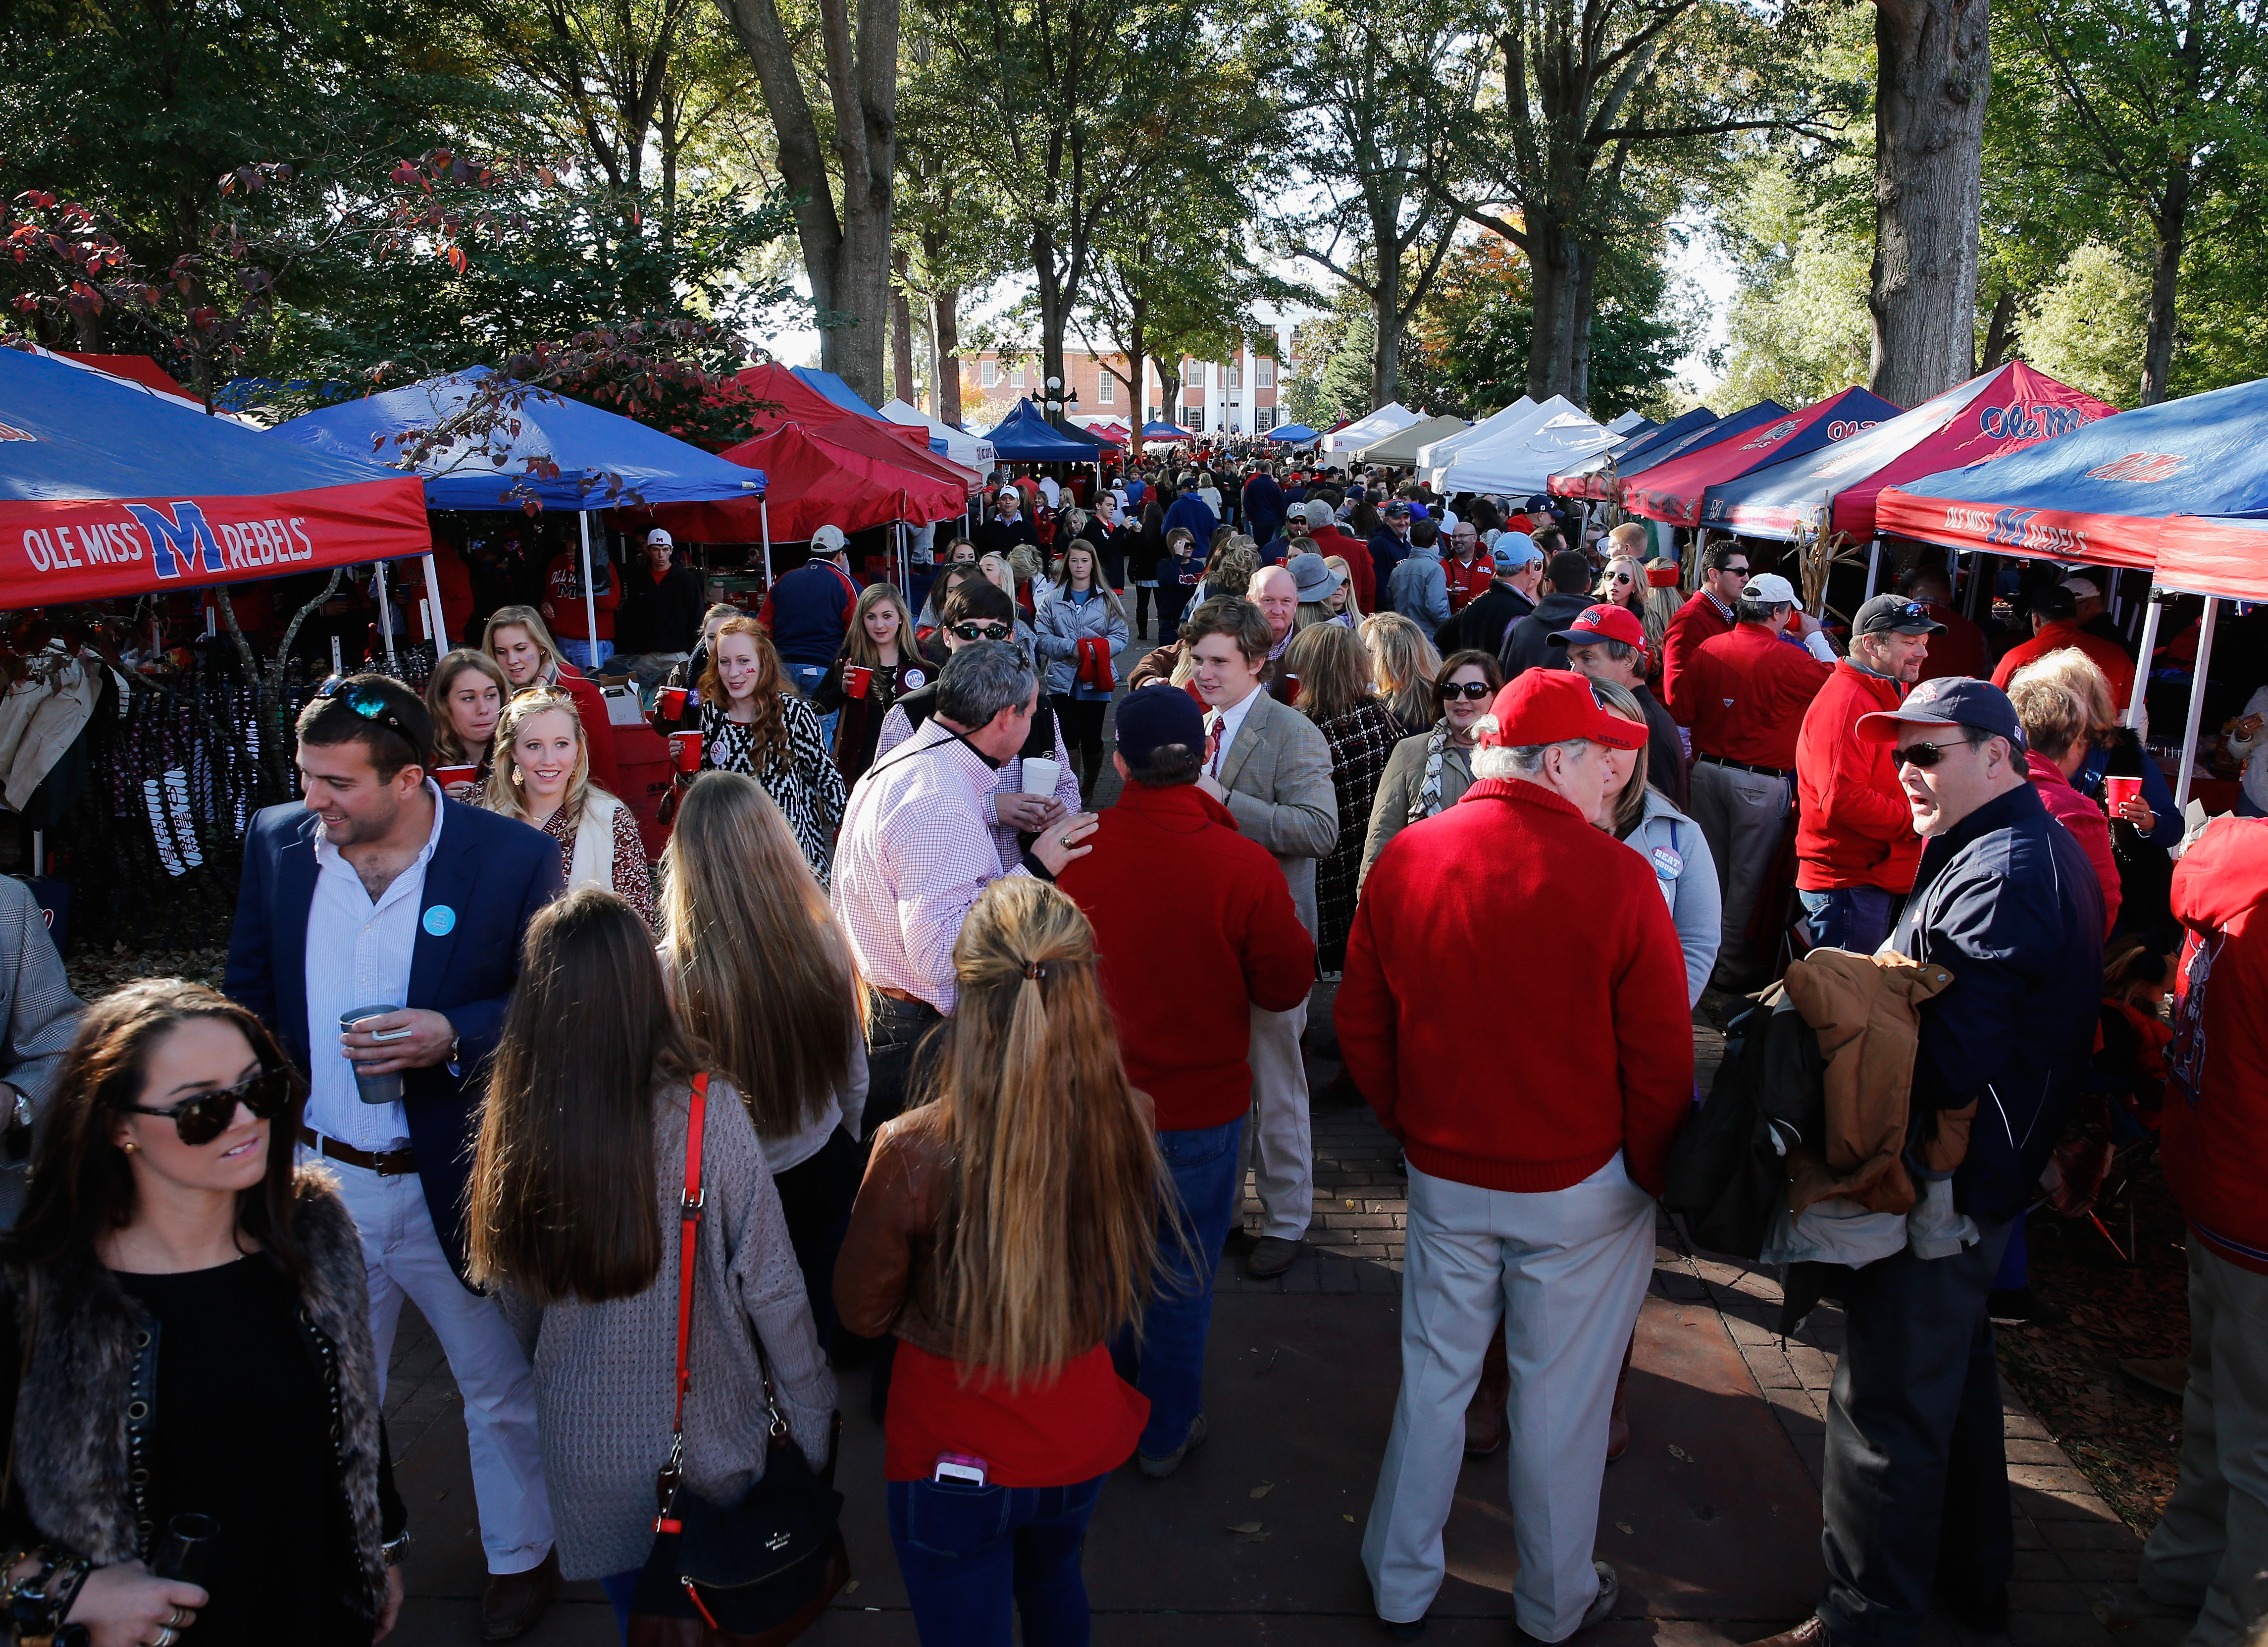 Ole Miss fans attend pregame parties in The Grove as the Mississippi Rebels host the Auburn Tigers at Vaught-Hemingway Stadium in Oxford, Miss. on Nov. 1, 2014.